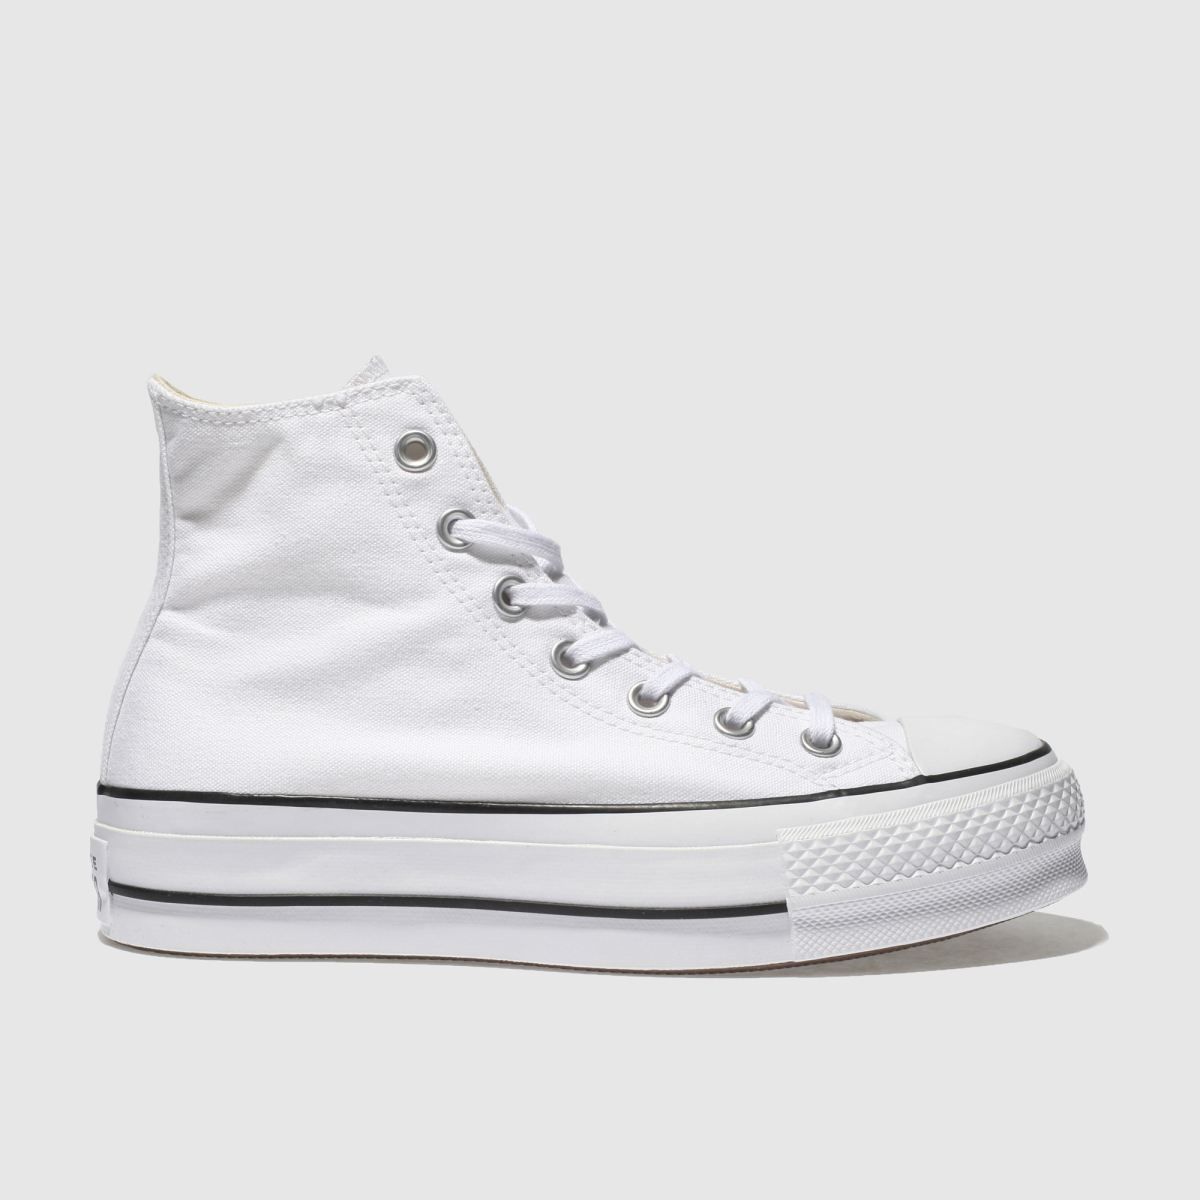 Converse all star lift hi trainers in white | Schuh